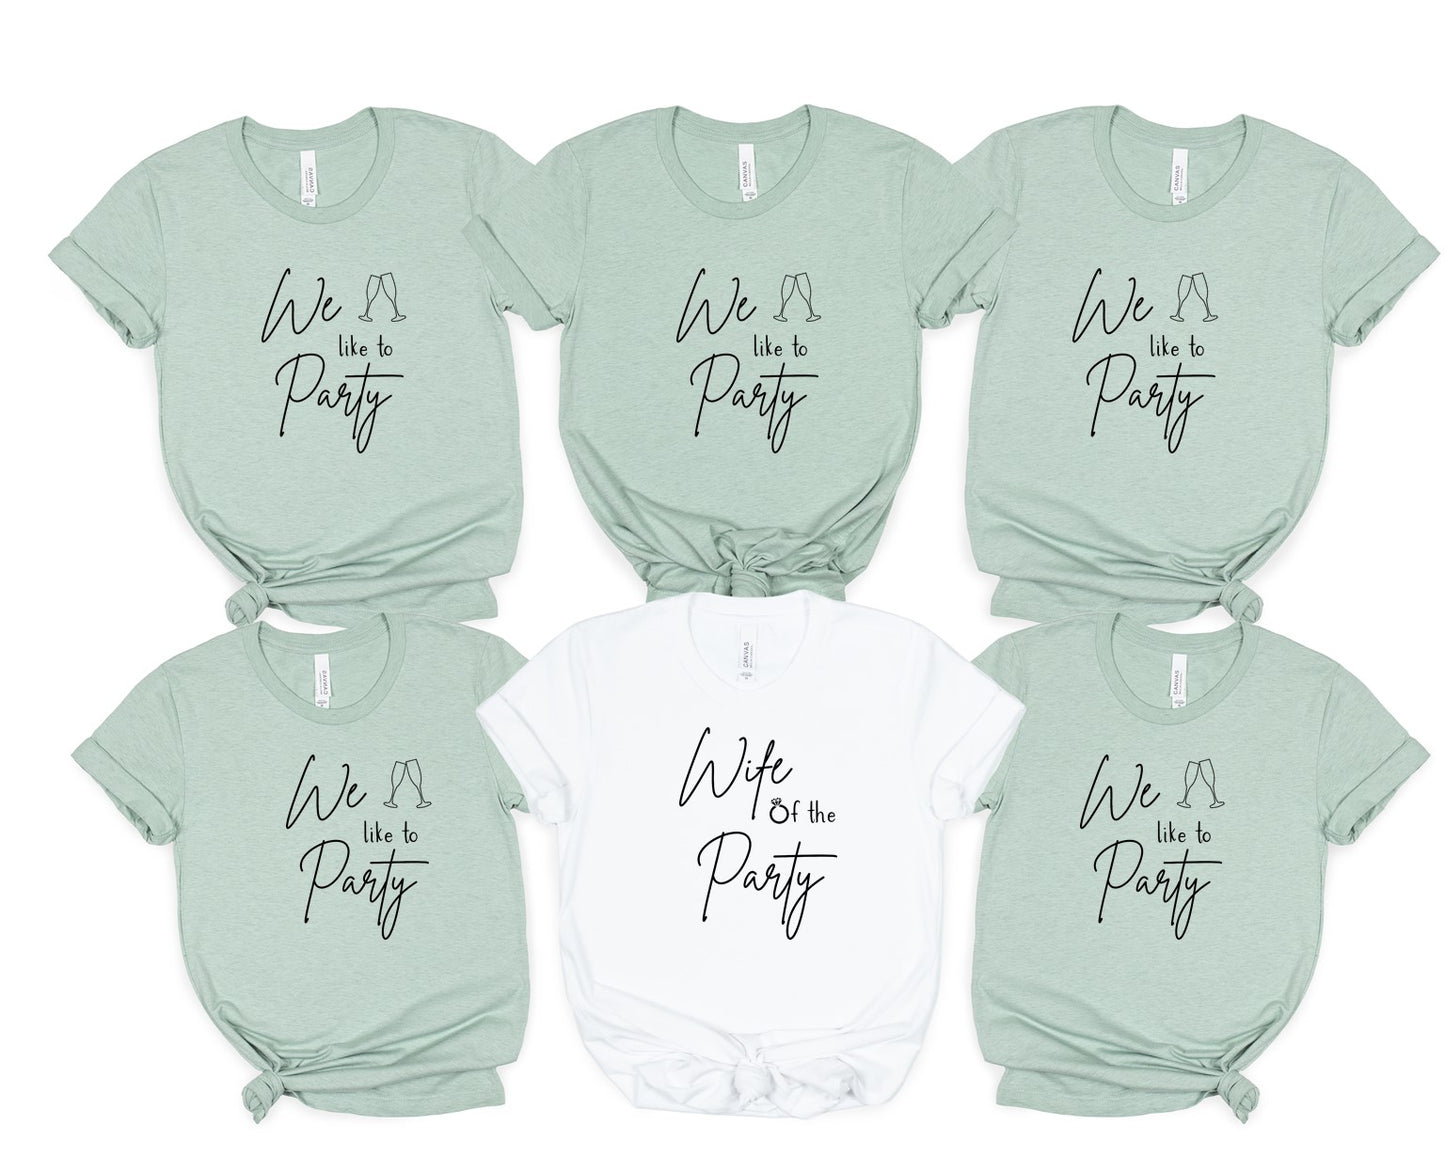 Wife of the Party - Bachelorette Shirts